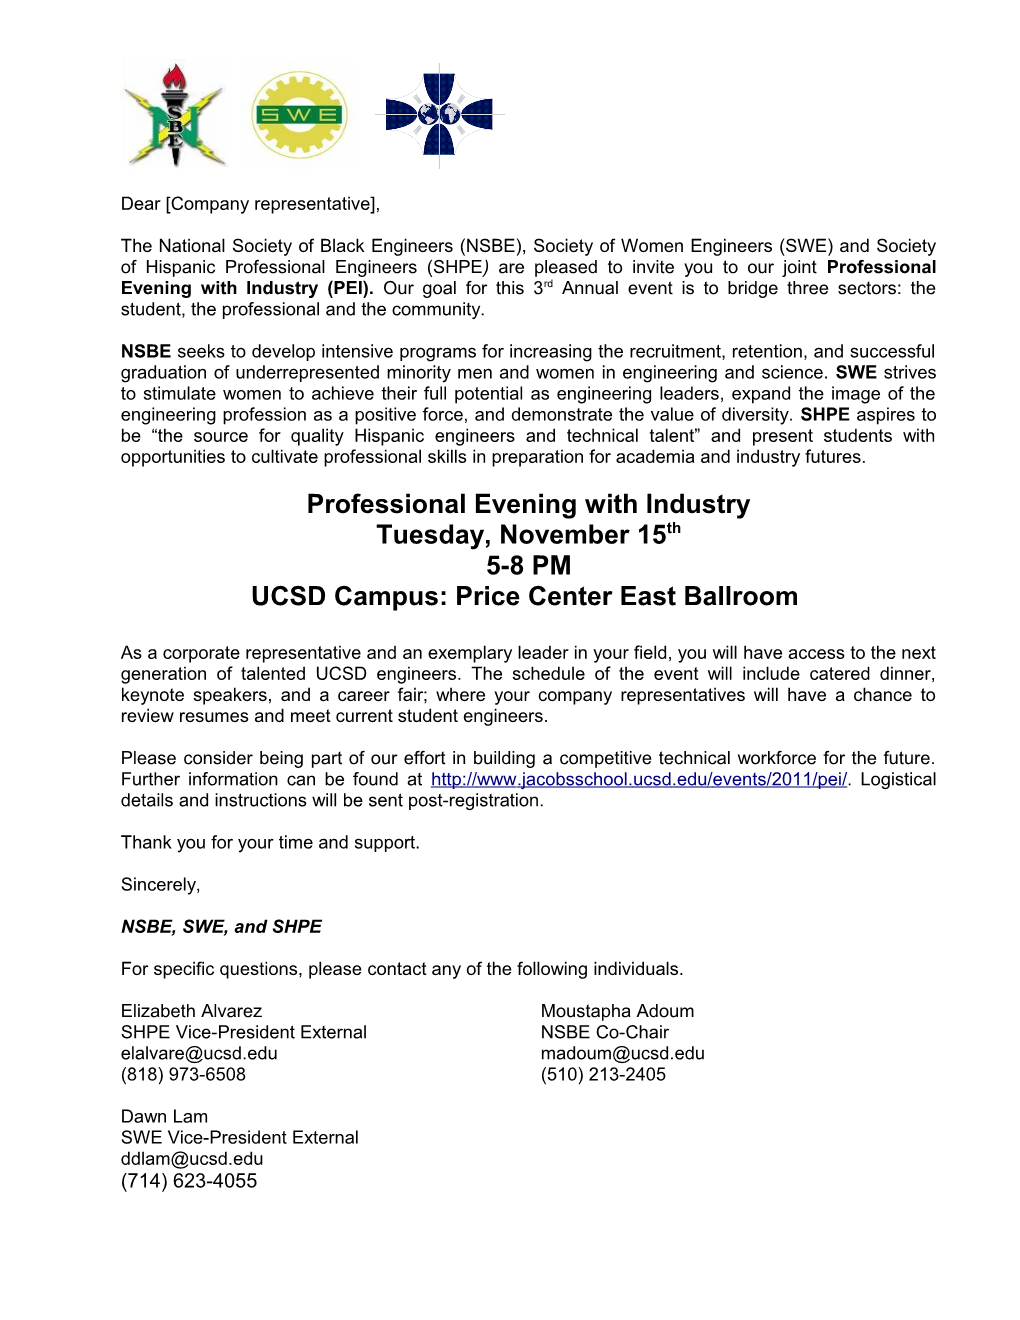 Professional Evening with Industry